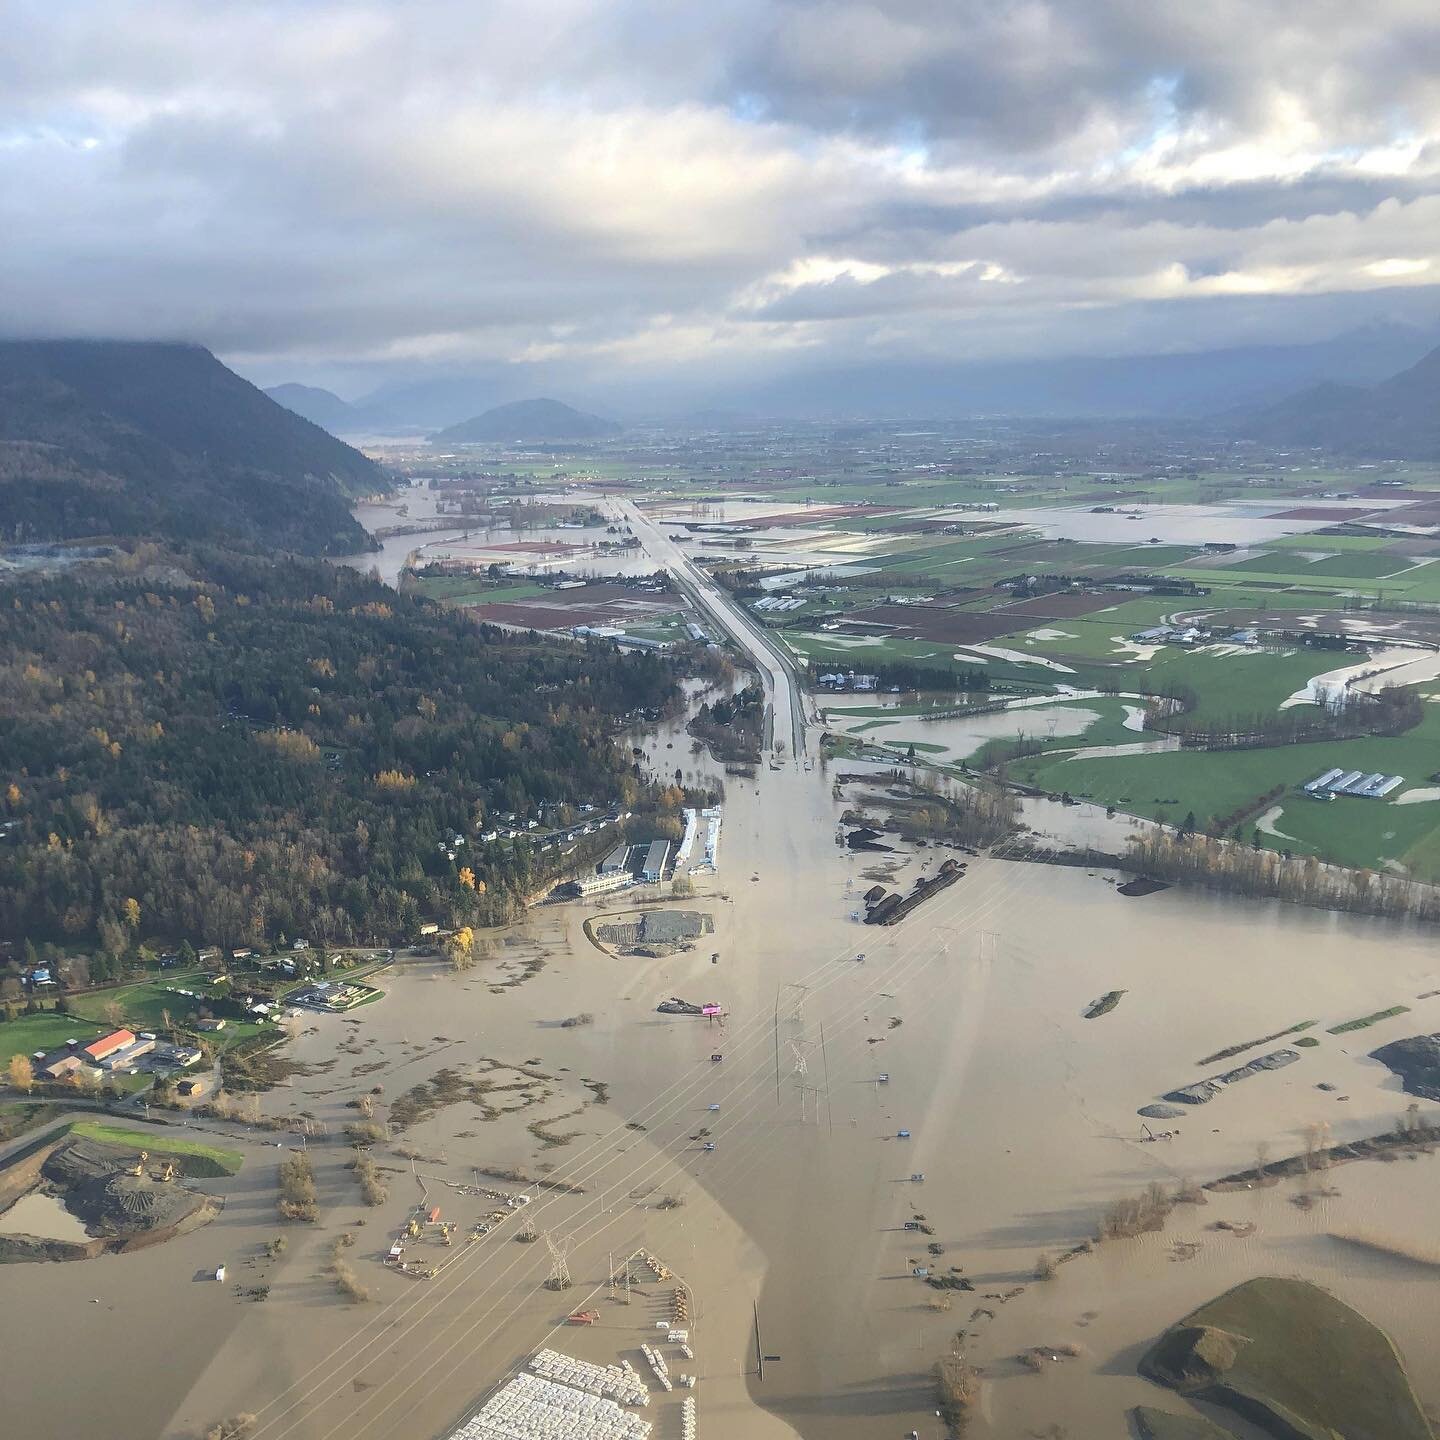 We are deeply saddened by the tragic floods that have occurred in B.C. and our thoughts are with everyone affected by this.
On Friday November 19, we will be donating $1 from each pint sold at @bridgebrewcrew and @lonsdalebridgedeck to @thisismylocal